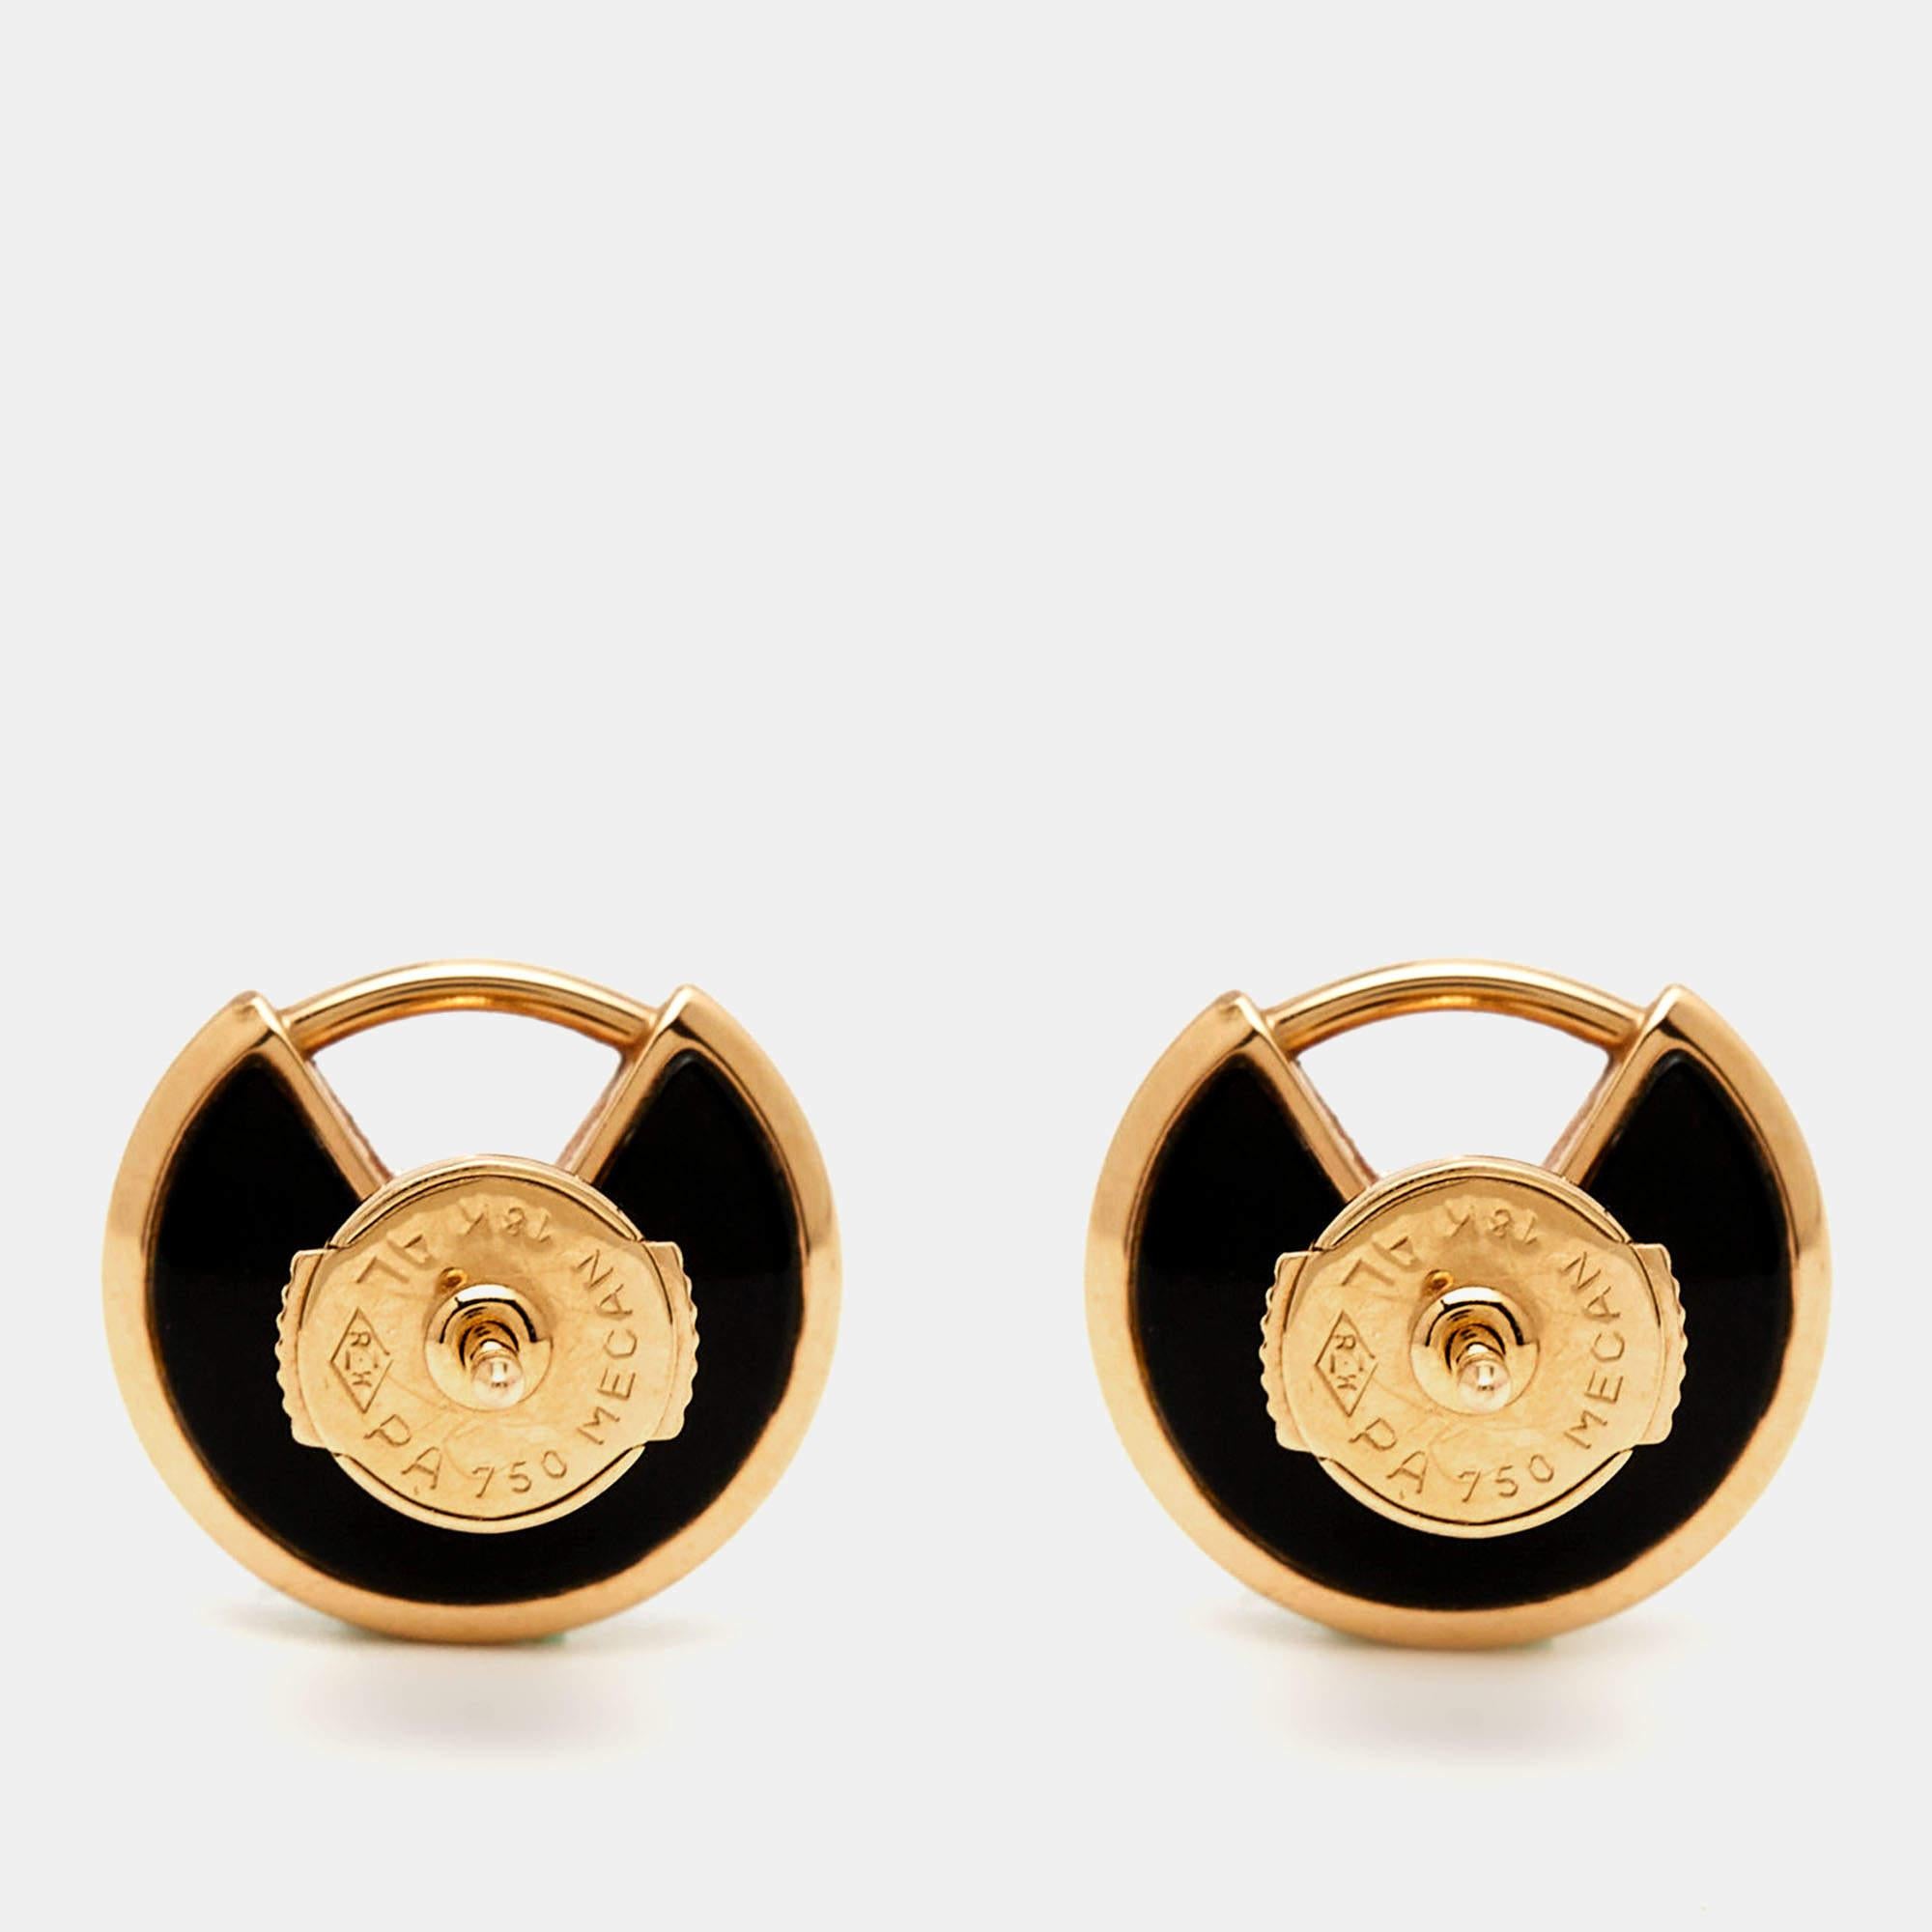 Experience timeless elegance with the Cartier Amulette De Cartier earrings. Crafted with precision, these earrings boast a striking combination of onyx and diamonds set in luxurious 18k rose gold. A symbol of refinement and sophistication, they